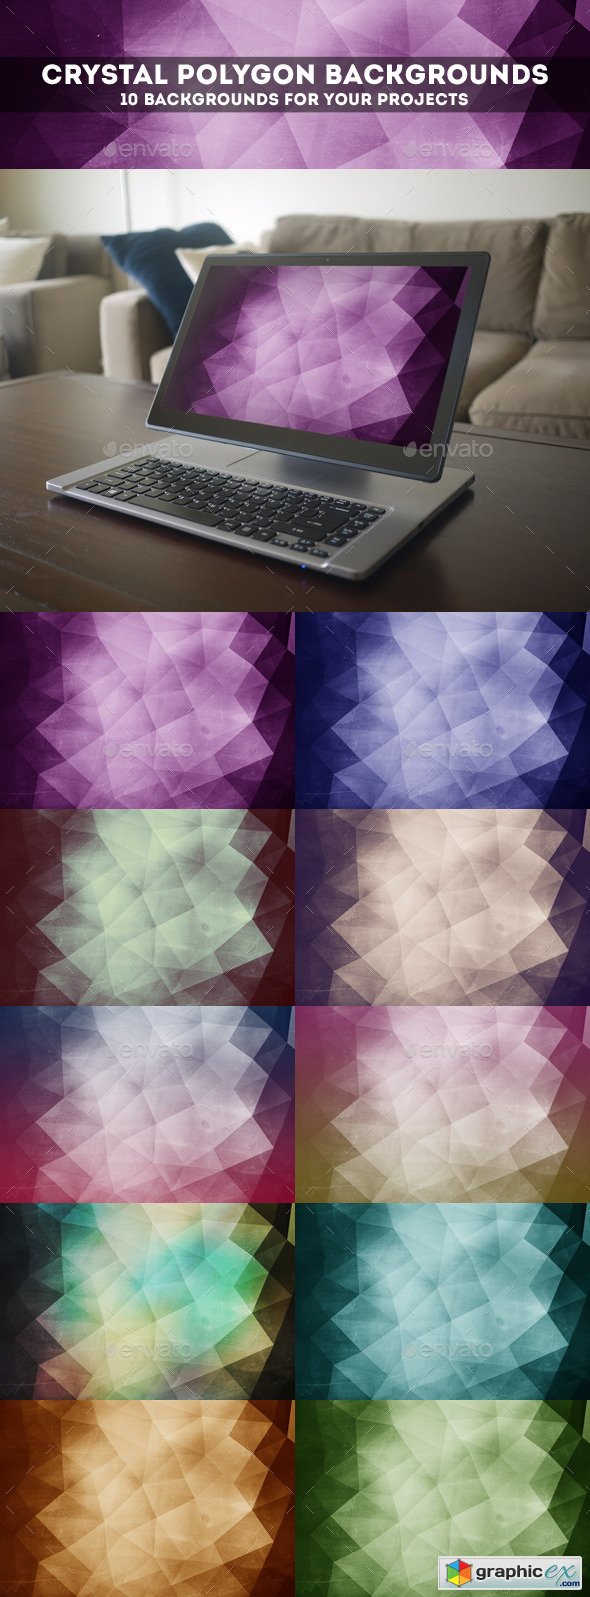 Crystal Polygon Backgrounds